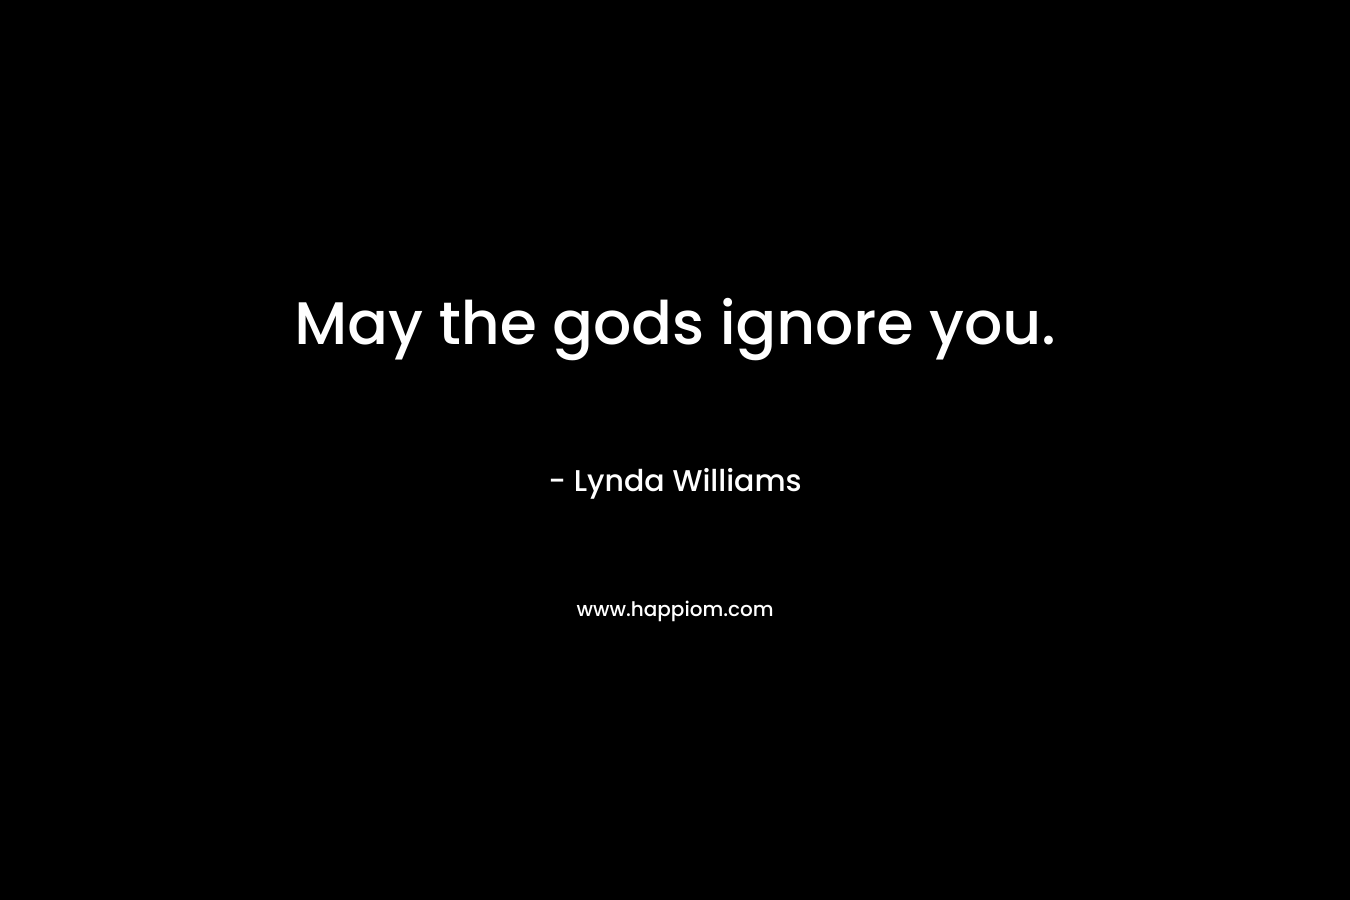 May the gods ignore you.